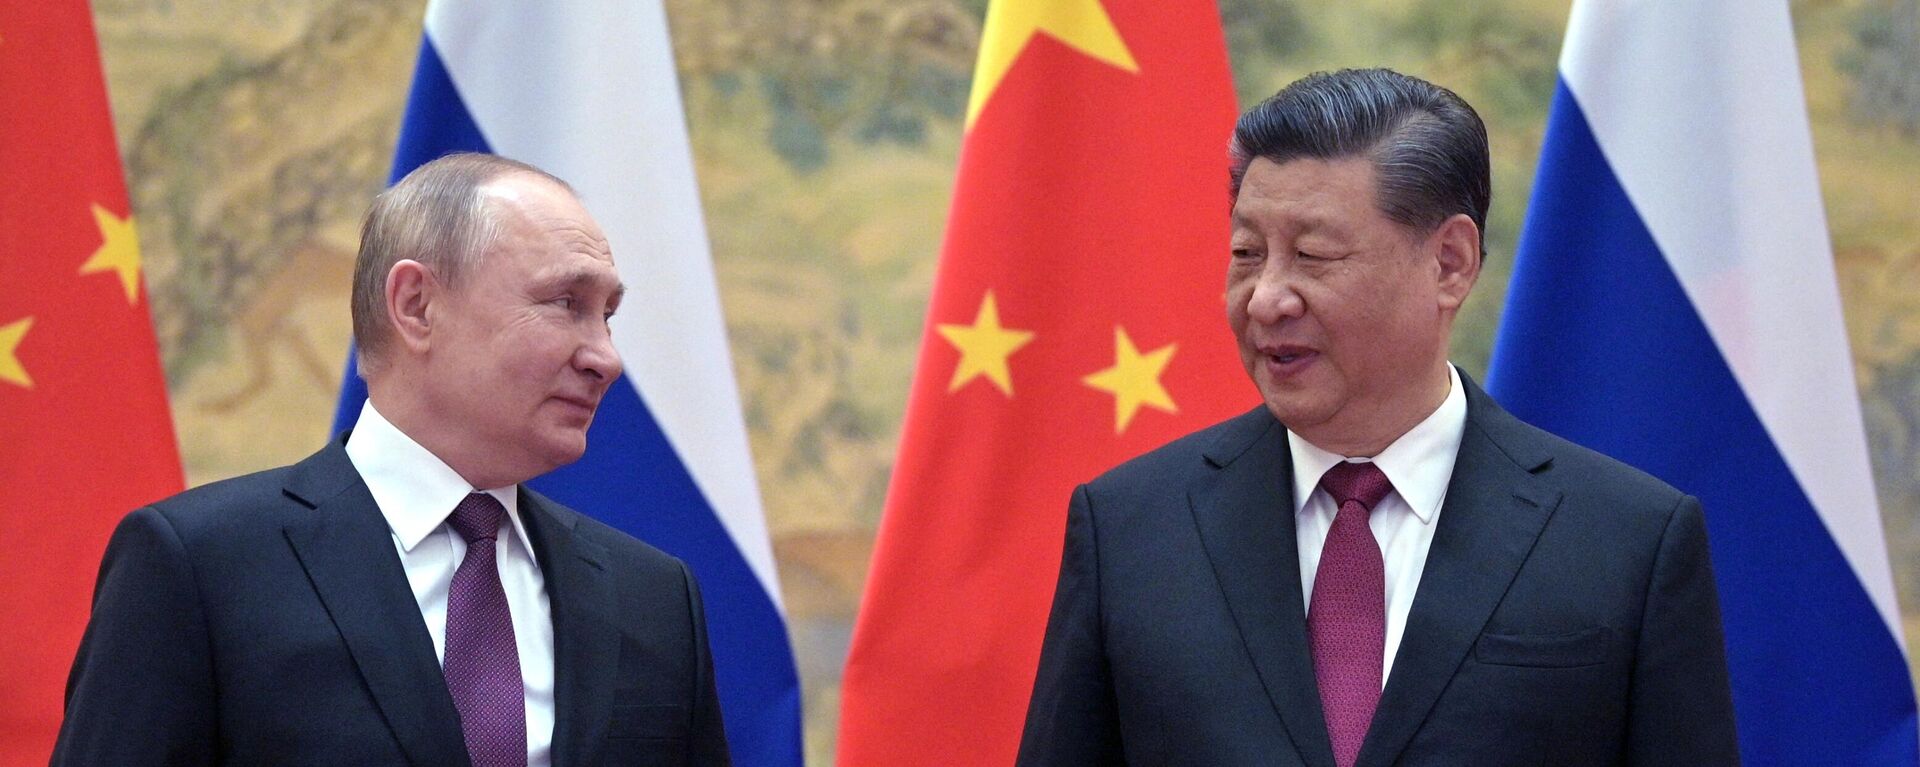 Russian President Vladimir Putin (L) and Chinese President Xi Jinping pose for a photograph during their meeting in Beijing, on February 4, 2022. - Sputnik International, 1920, 27.07.2022